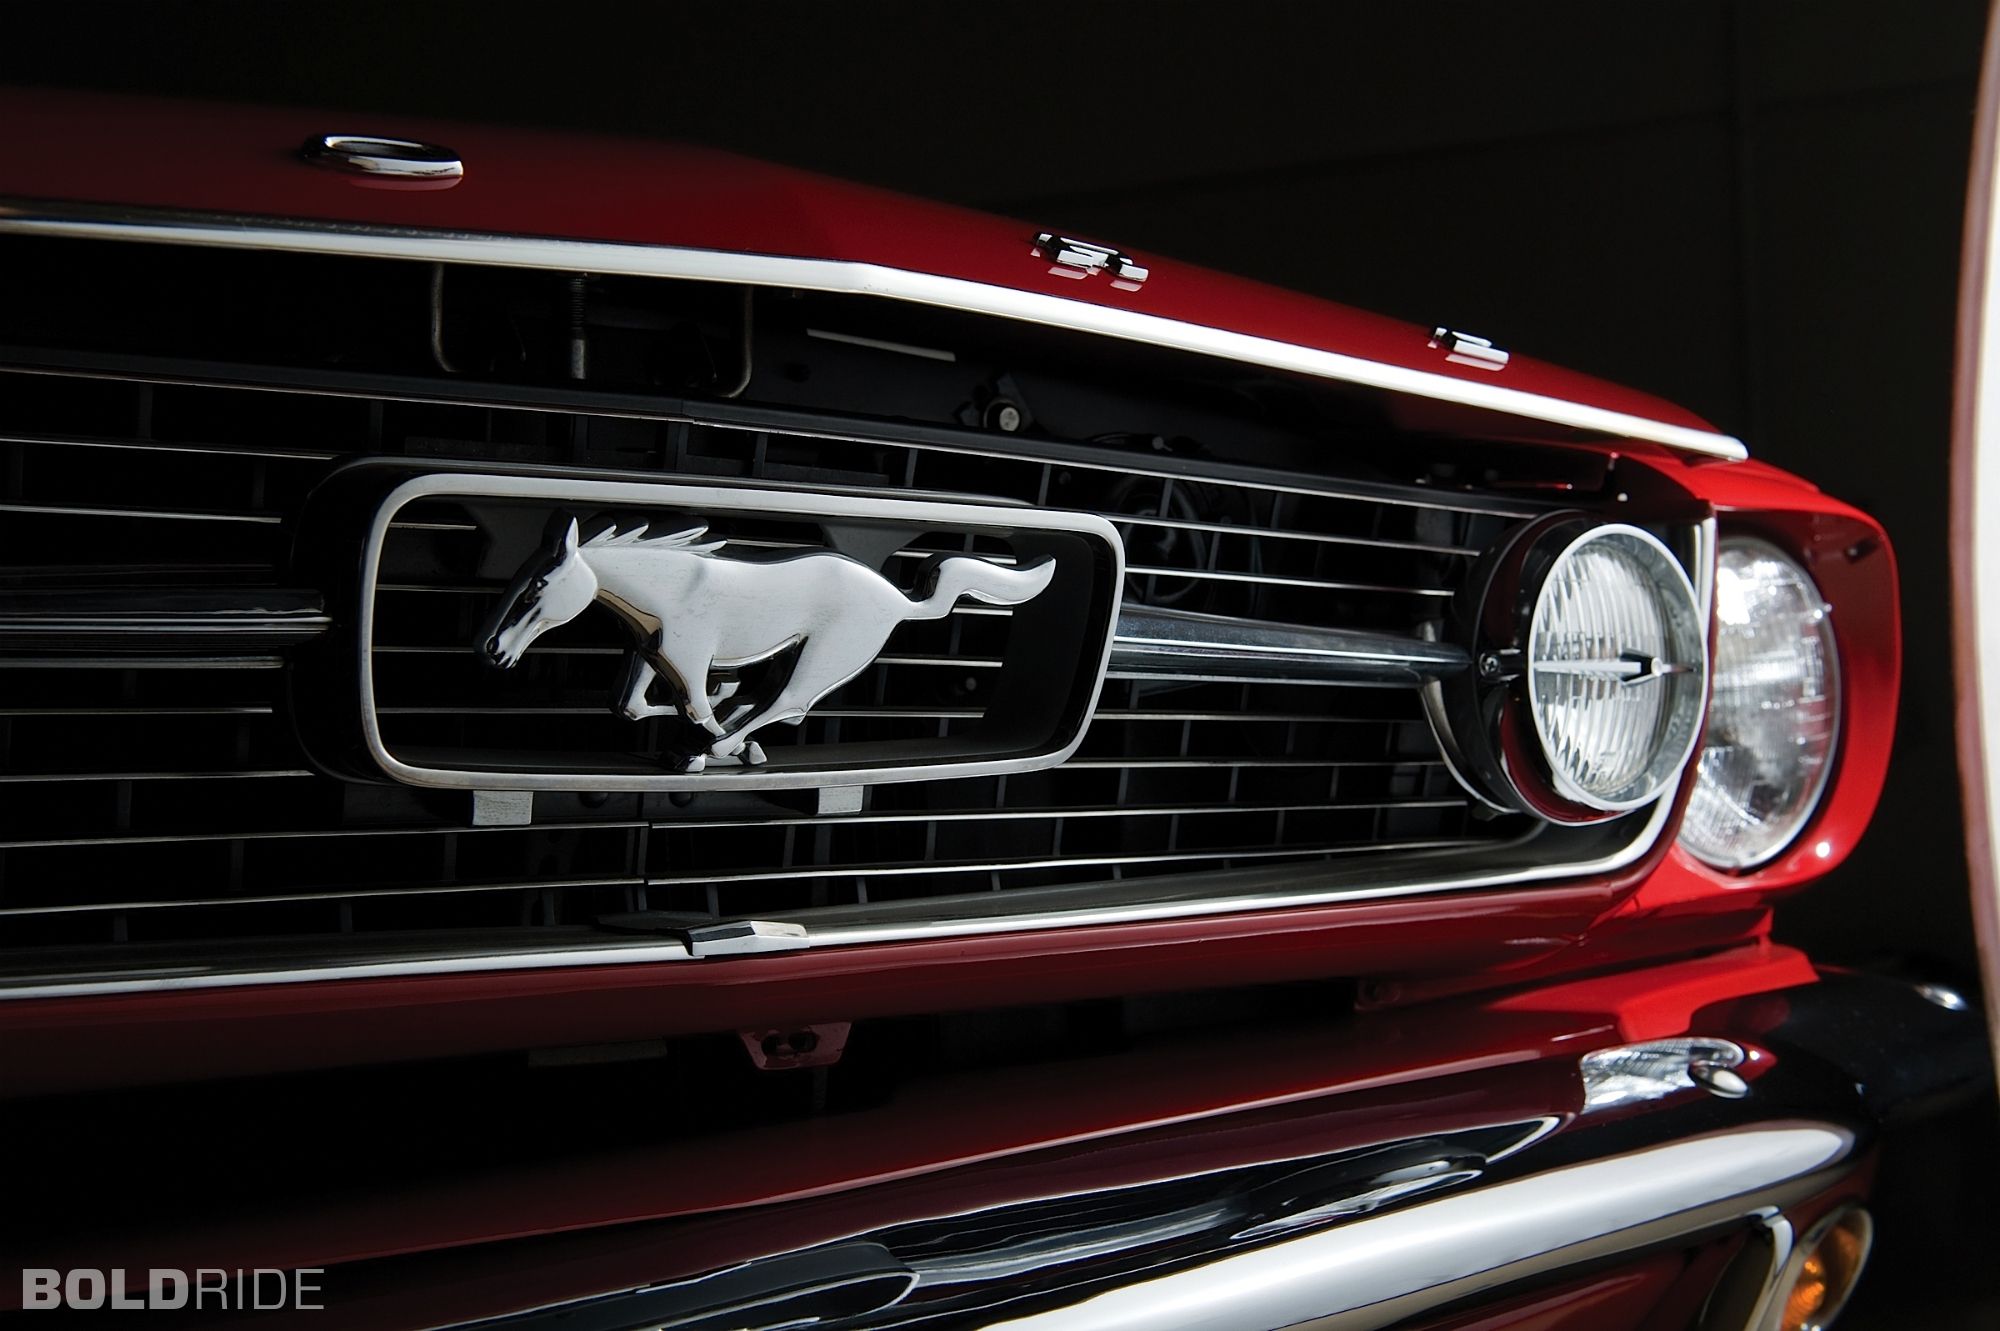 Classic Ford Mustang Wallpaper Free Classic Ford Mustang